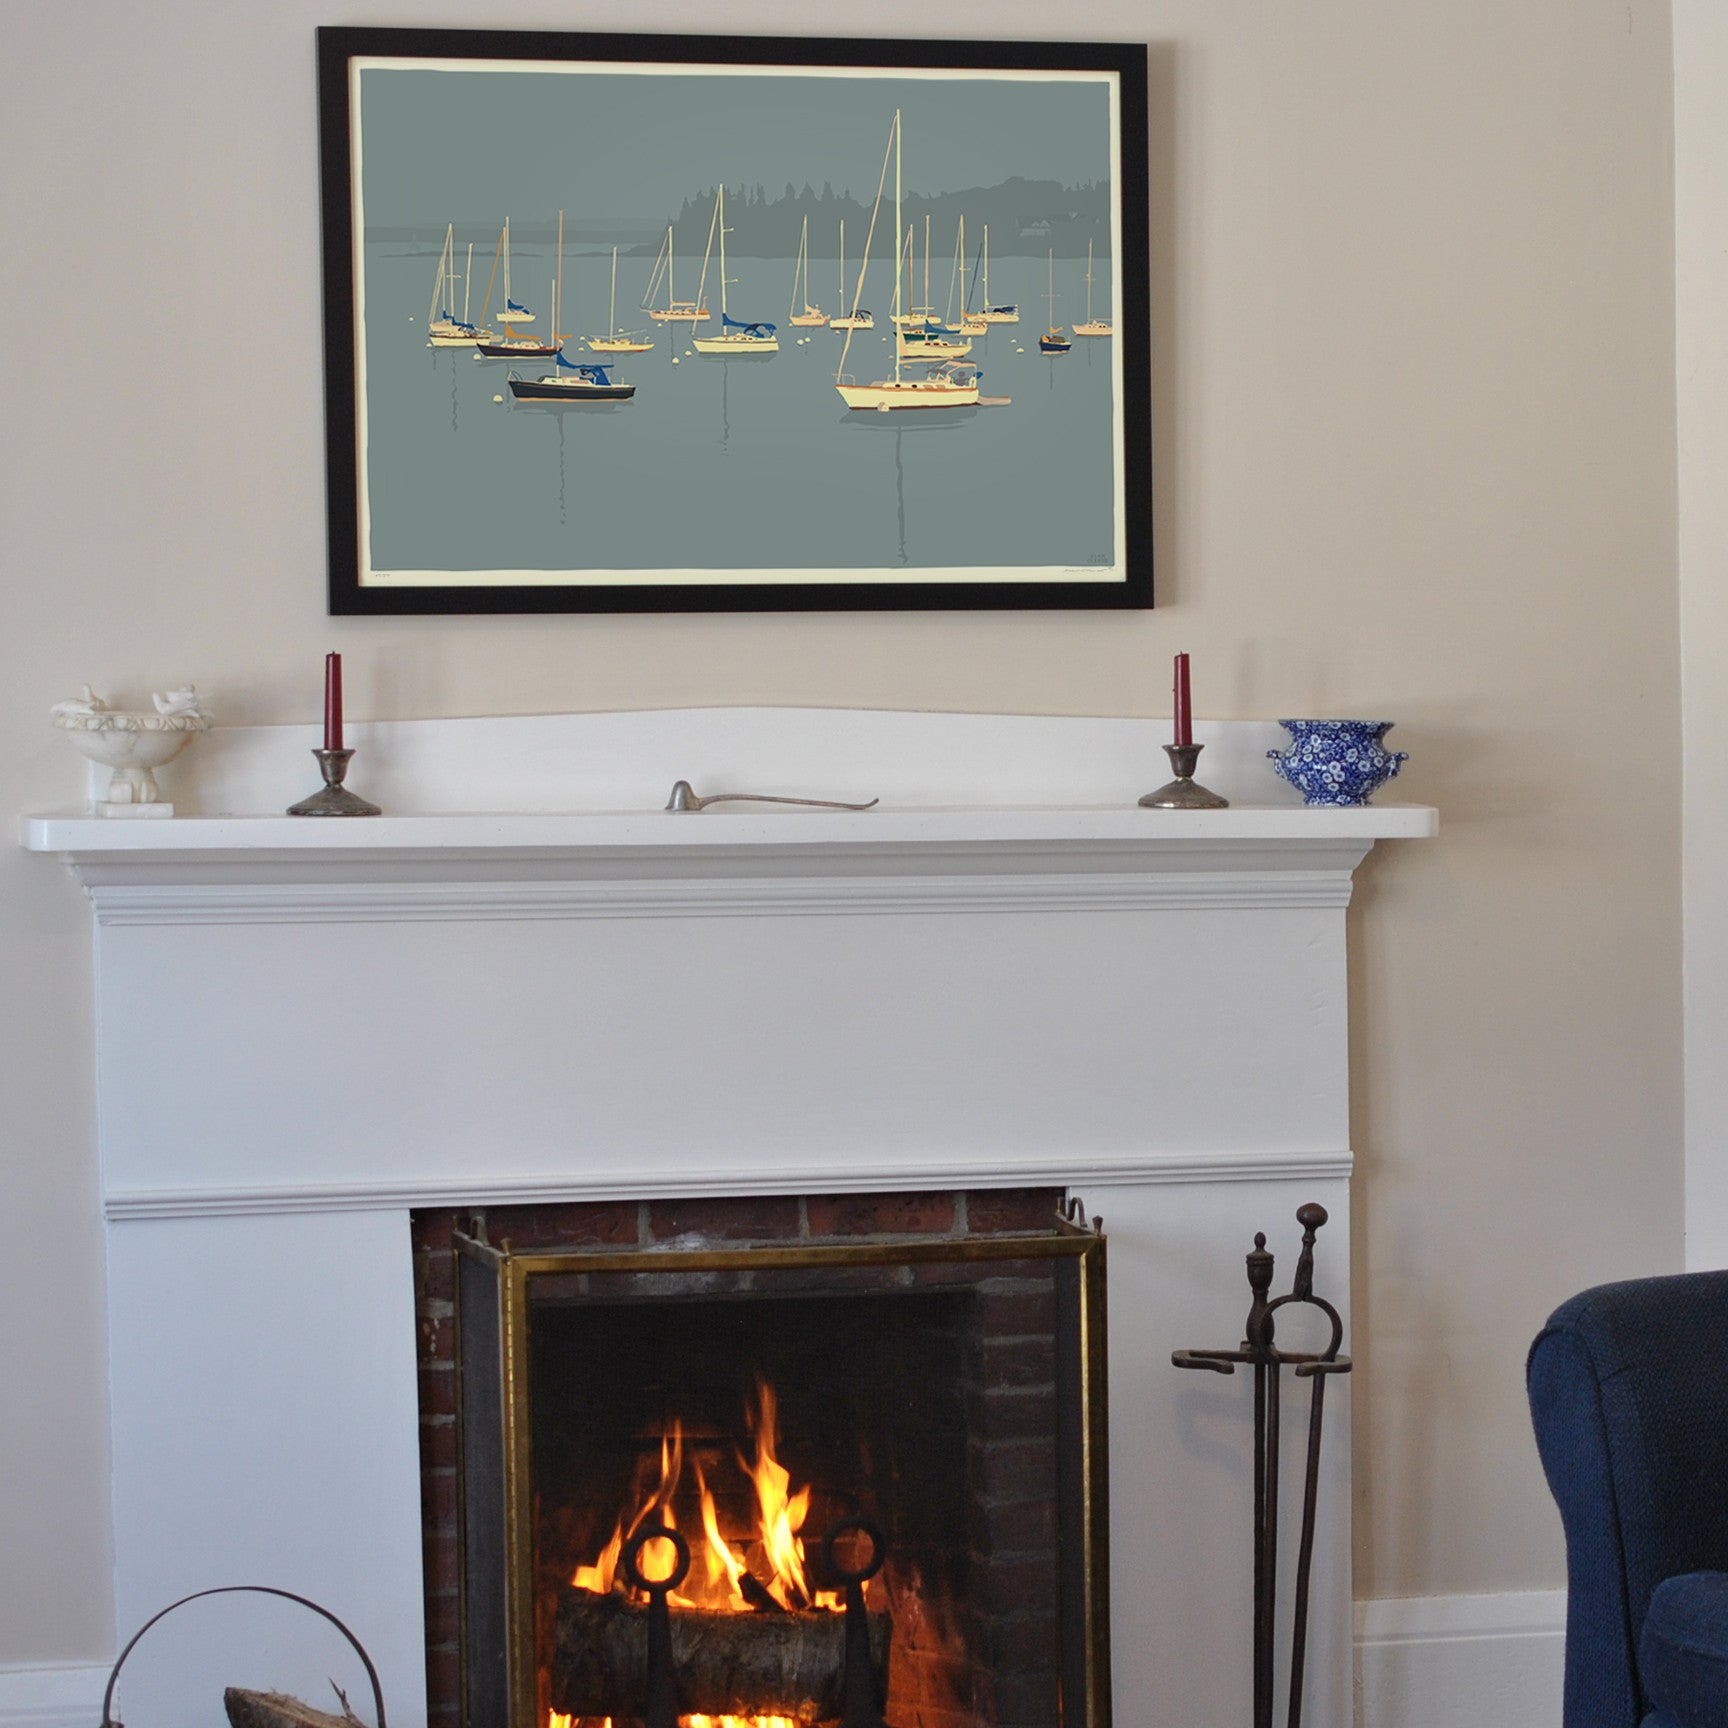 Sailboats in Rockland Harbor Art Print 24" x 36" Framed Wall Poster By Alan Claude  - Maine